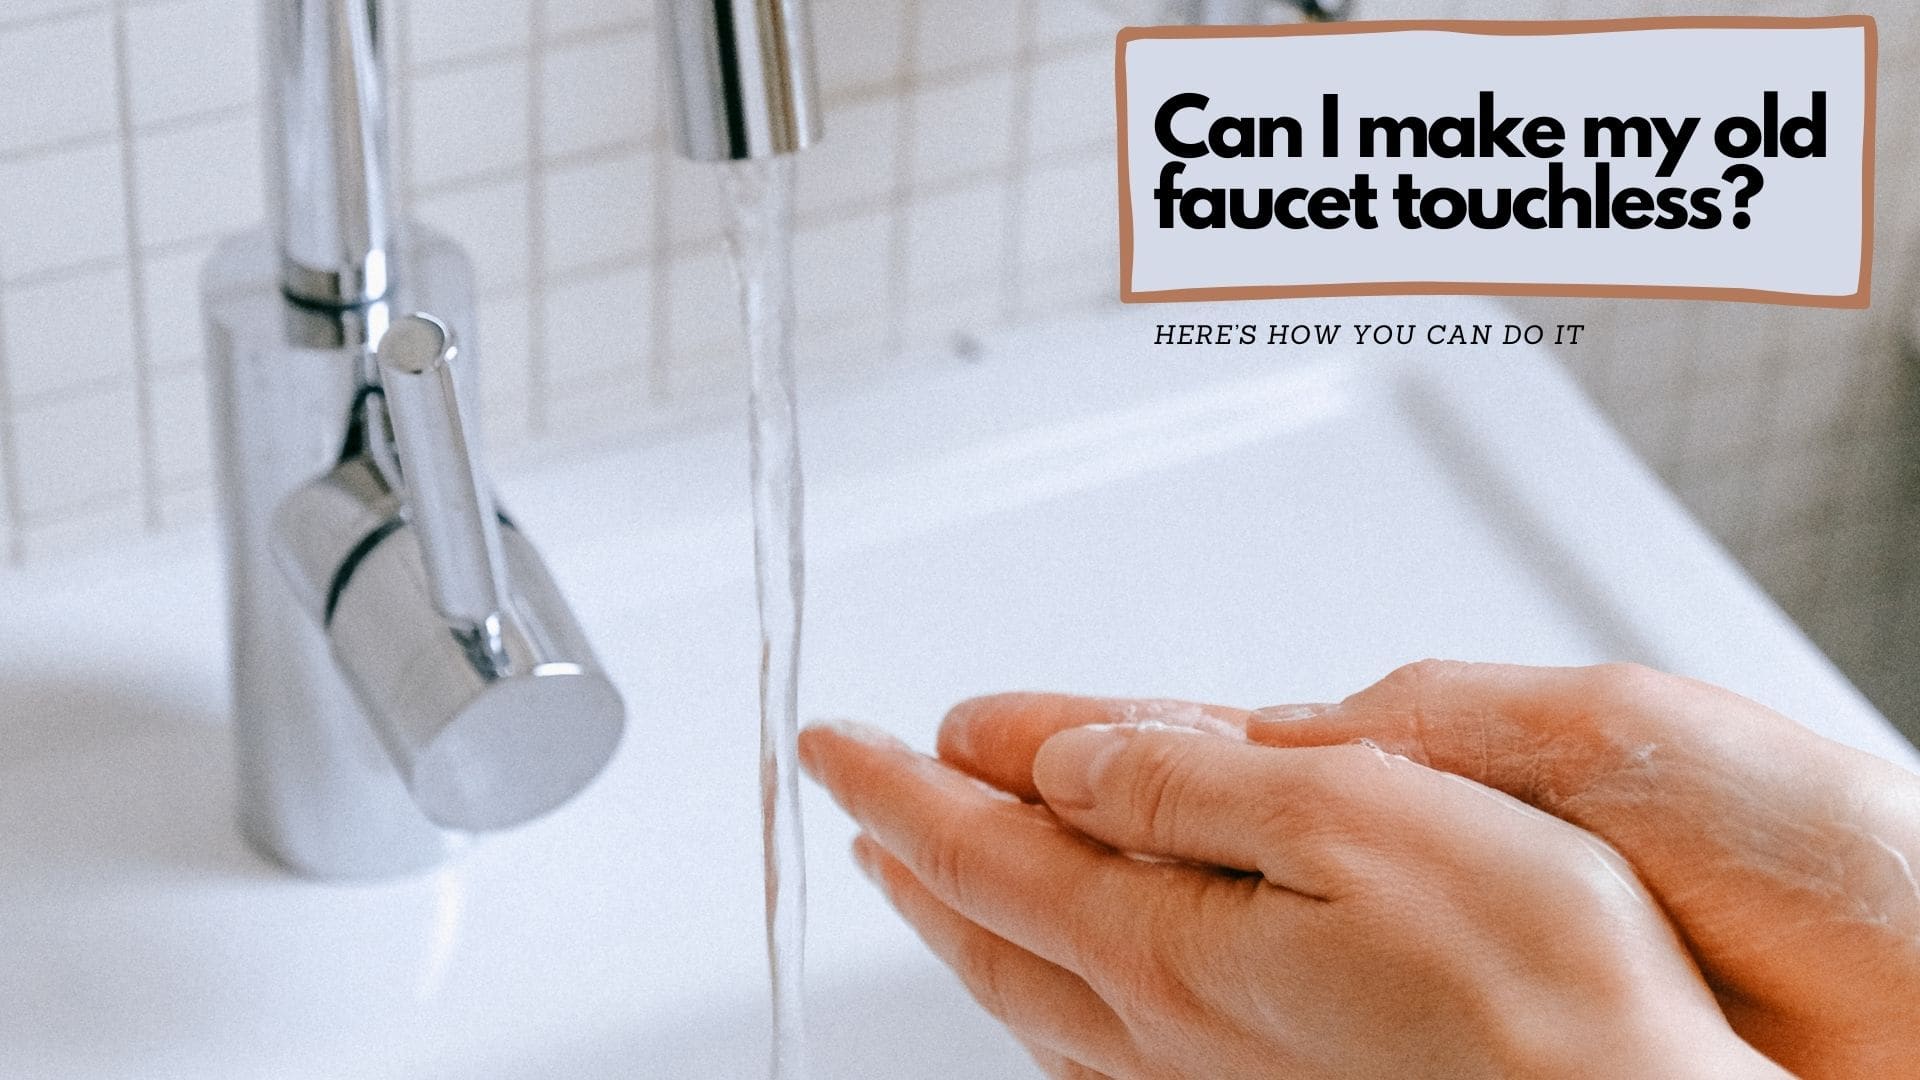 Can I make my old faucet touchless? - You can use a touchless faucet adapter